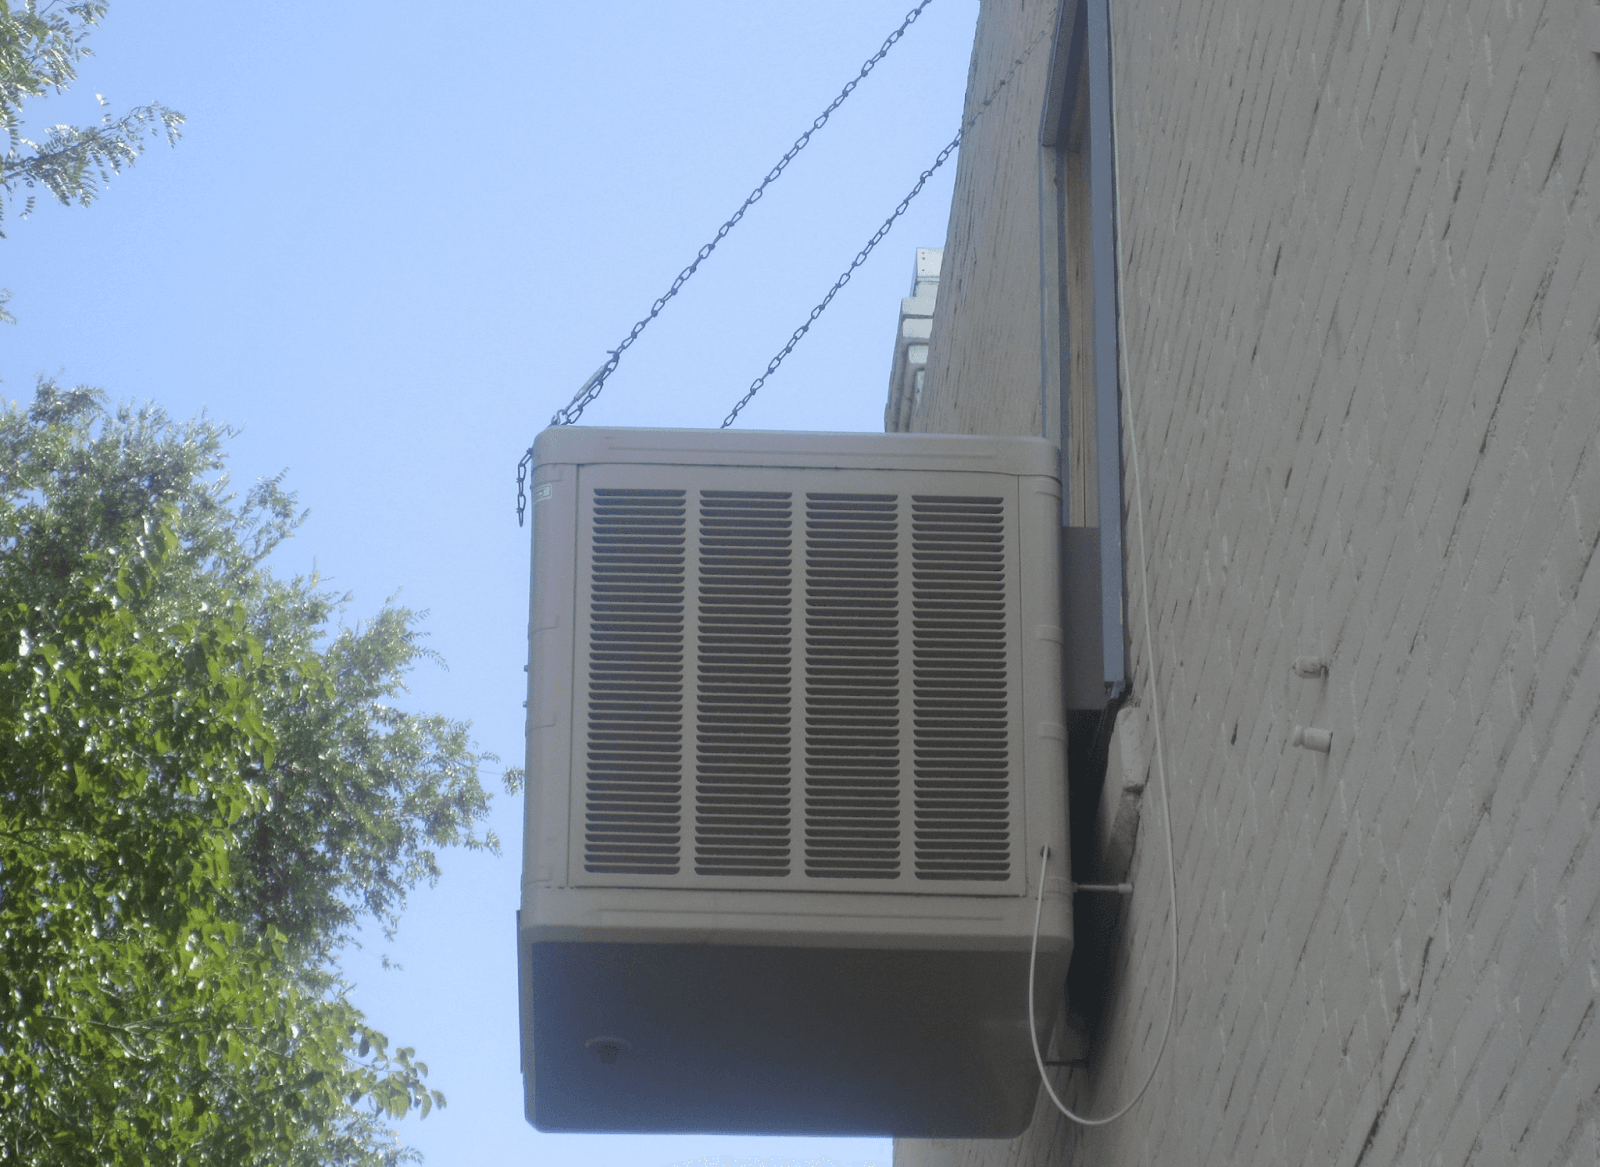 image of air conditioner attached to a building